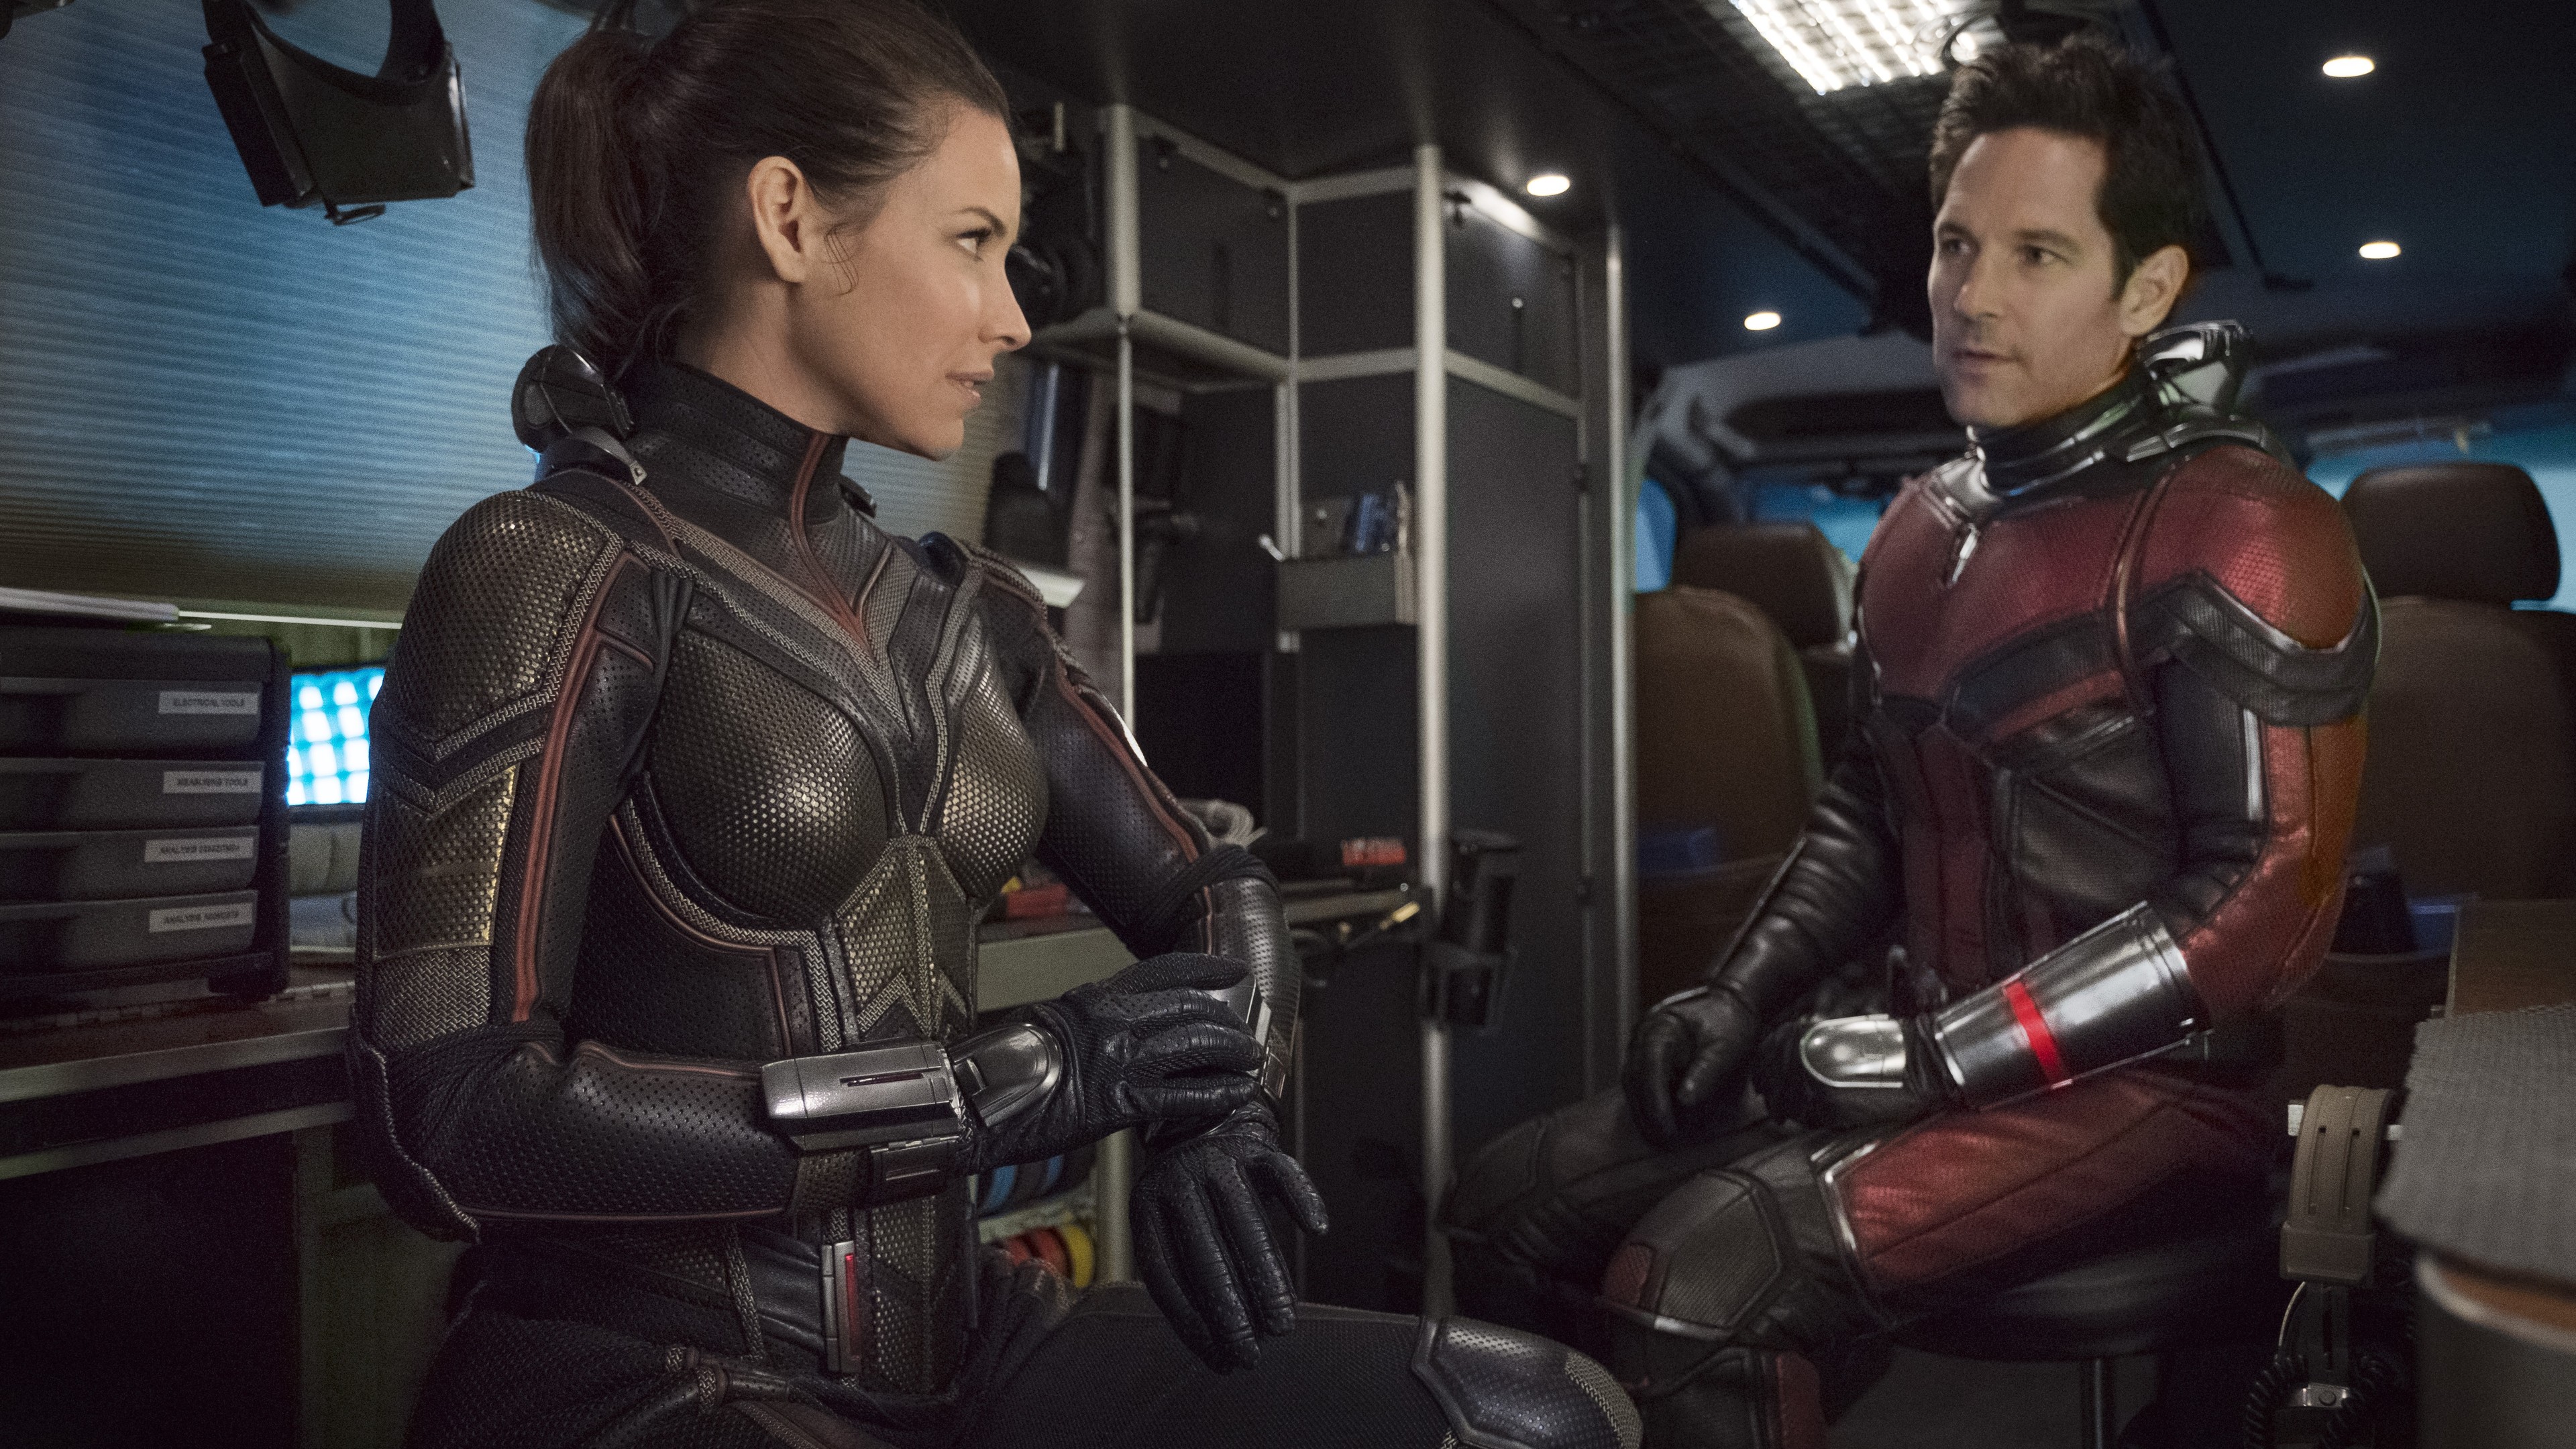 ant man and the wasp movie 2018 1537645621 - Ant Man And The Wasp Movie 2018 - movies wallpapers, hd-wallpapers, ant man wallpapers, ant man and the wasp wallpapers, 5k wallpapers, 4k-wallpapers, 2018-movies-wallpapers